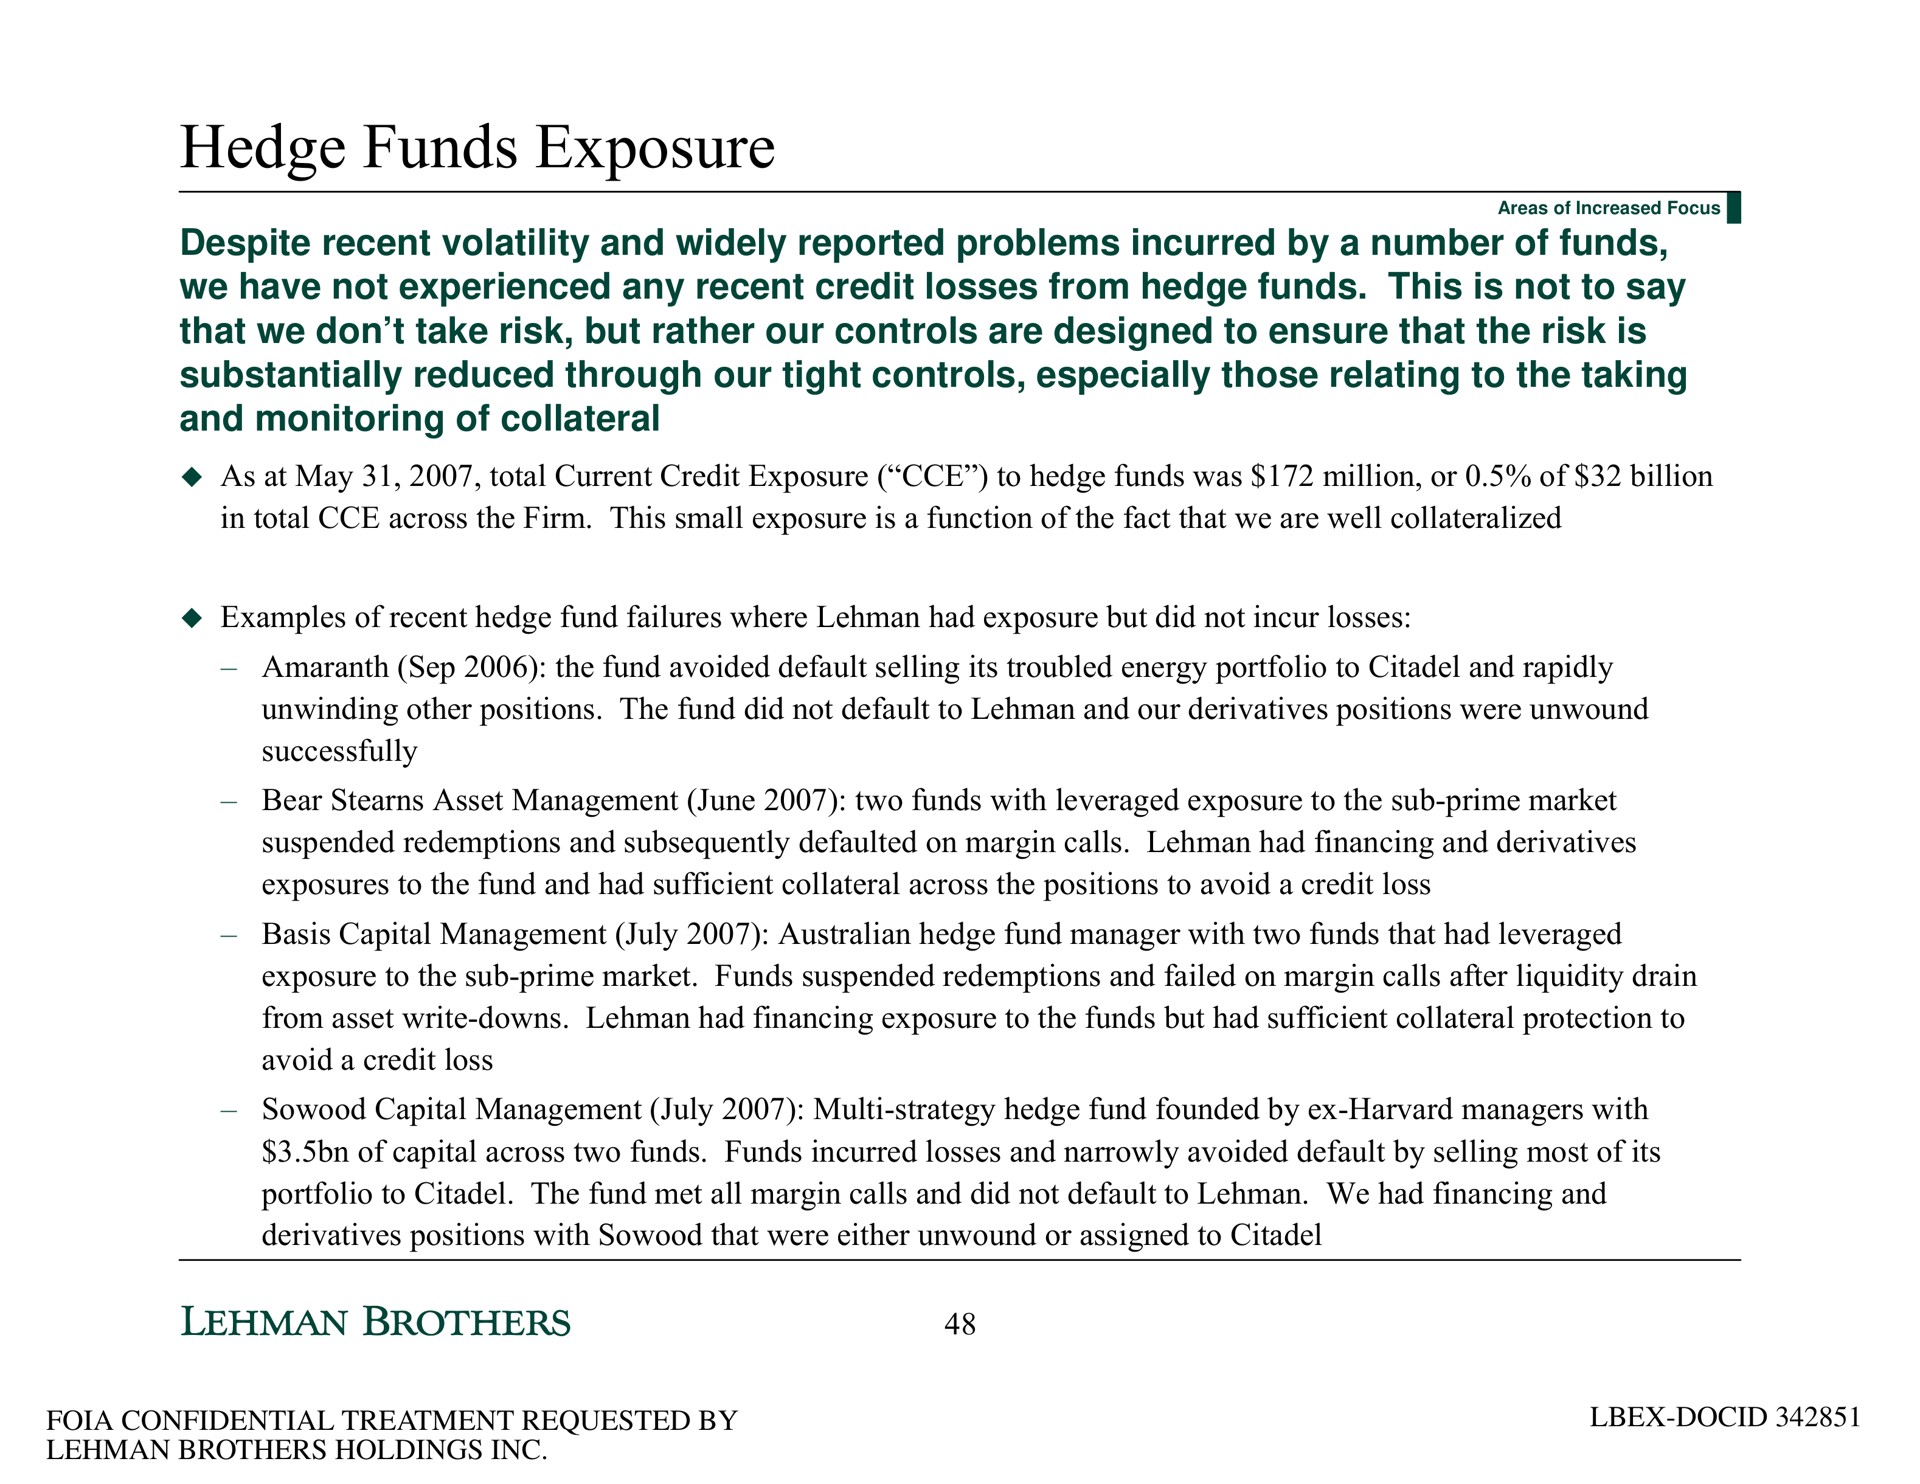 hedge funds exposure despite recent volatility and widely reported problems incurred by a number of funds we have not experienced any recent credit losses from hedge funds this is not to say that we don take risk but rather our controls are designed to ensure that the risk is substantially reduced through our tight controls especially those relating to the taking and monitoring of collateral | Lehman Brothers